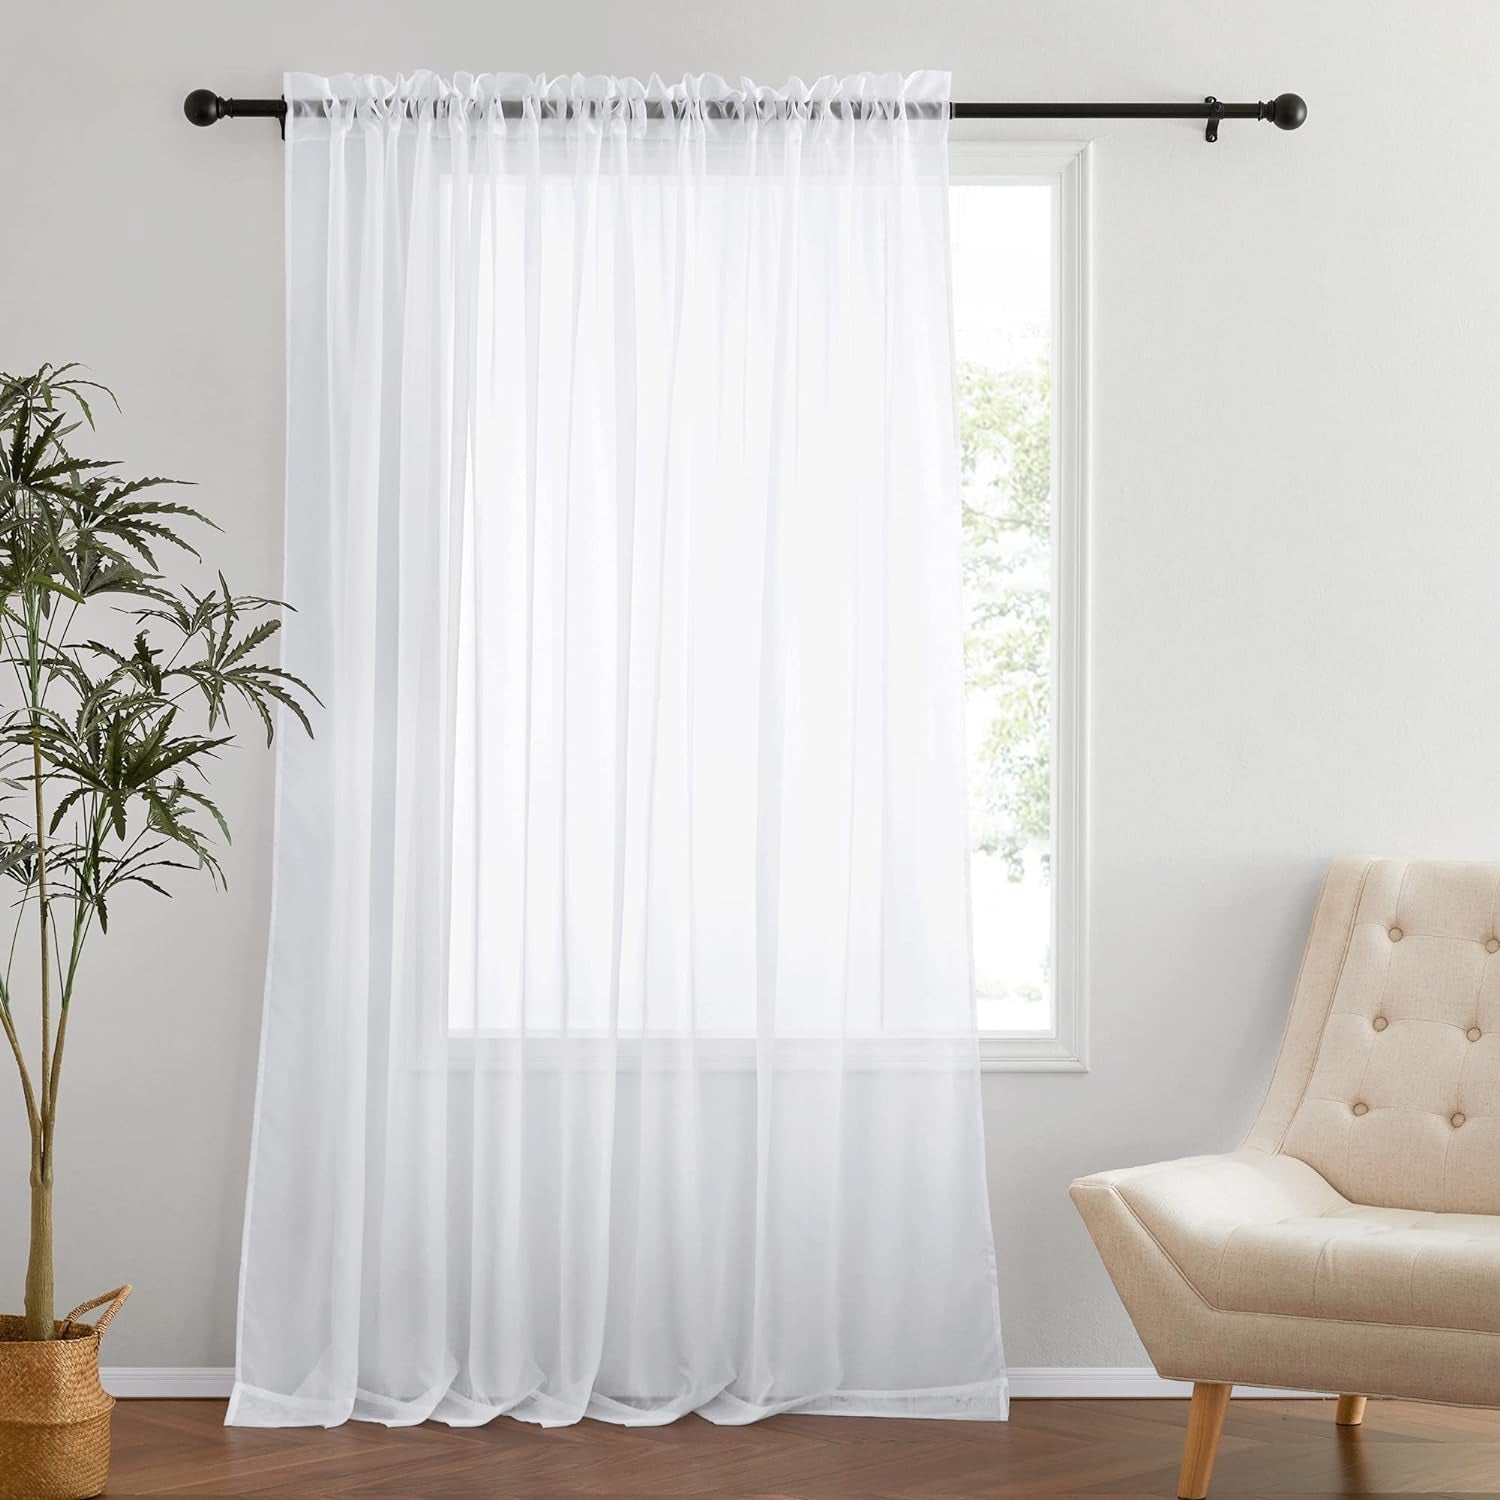 NICETOWN White 84 Inch Long, Extra Wide Sheer Voile Window Curtains Panels for Children Room & Door Decor (100" Wide, White, 1 Panel)